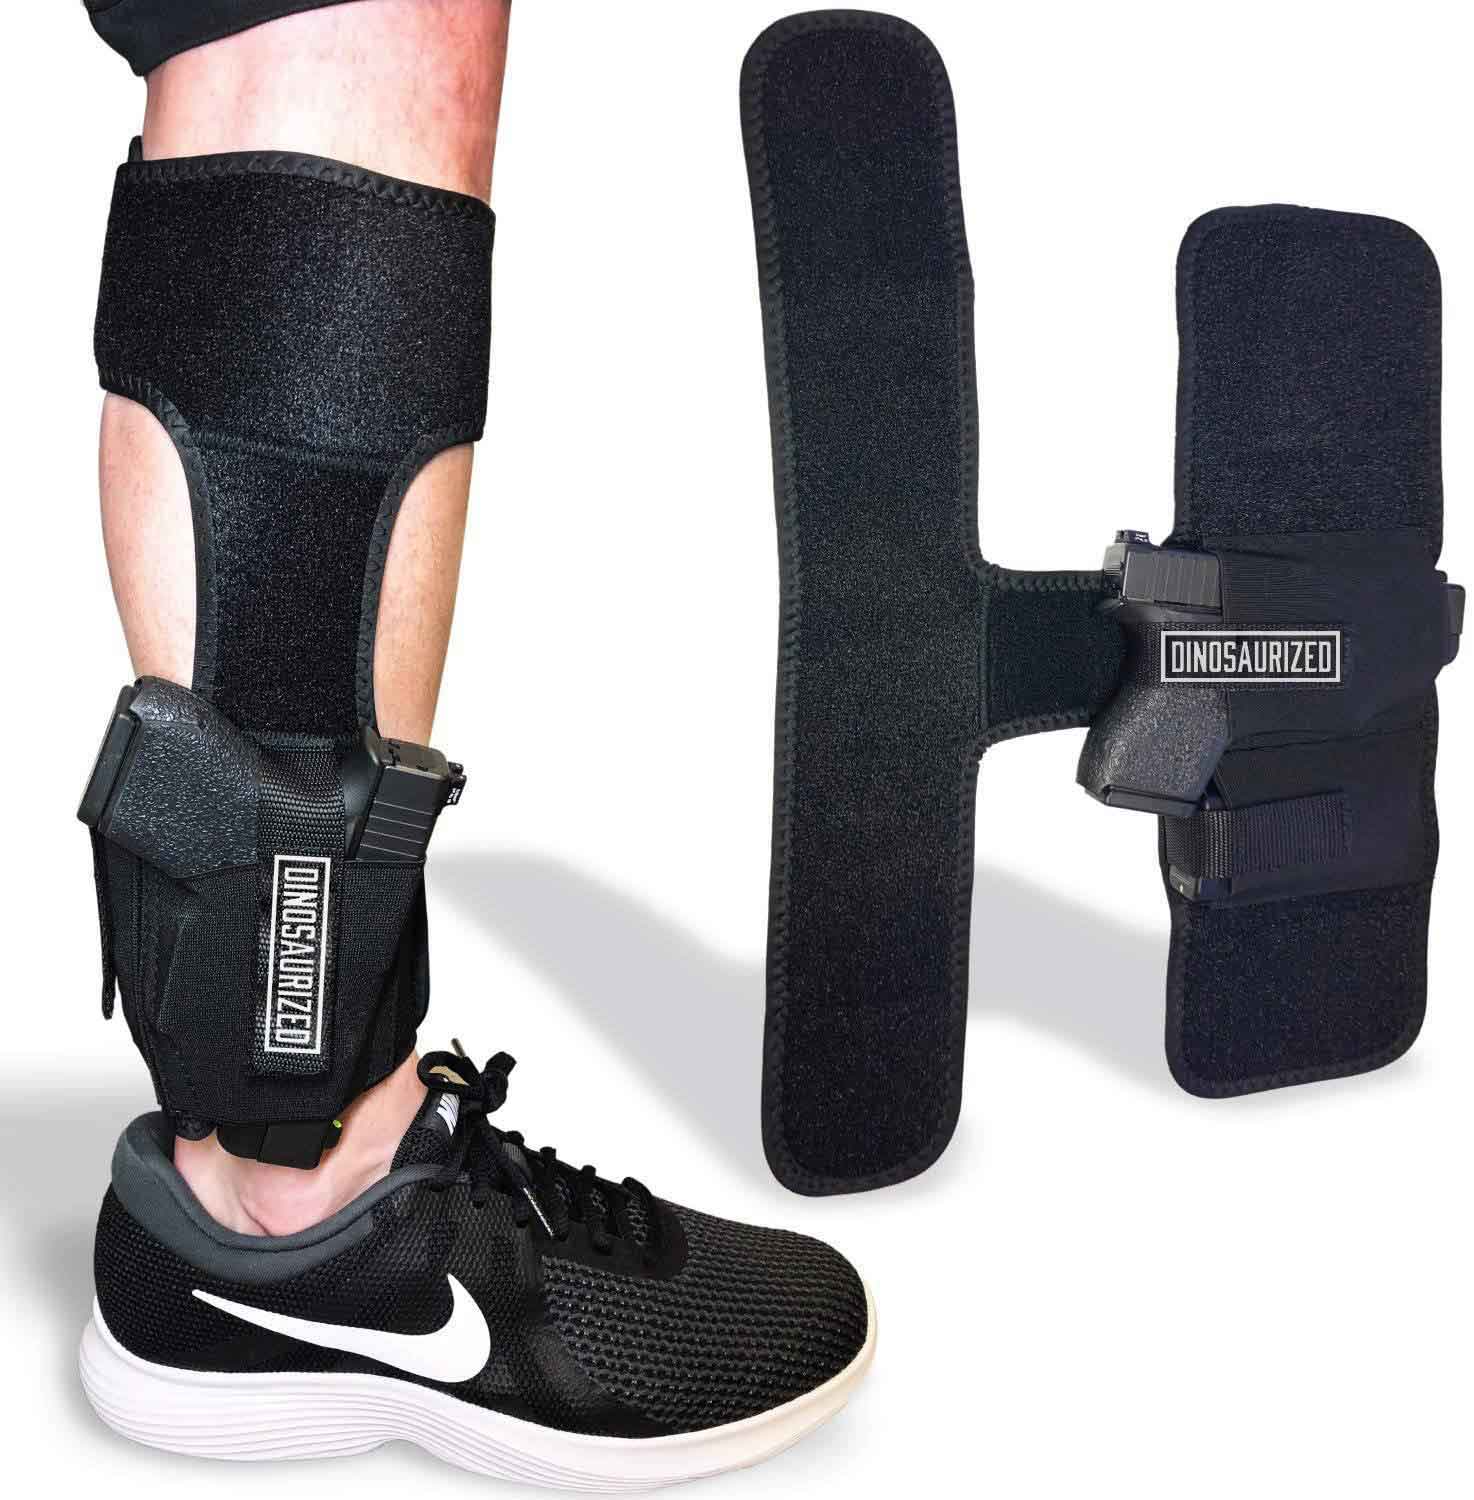 different types of ankle holsters